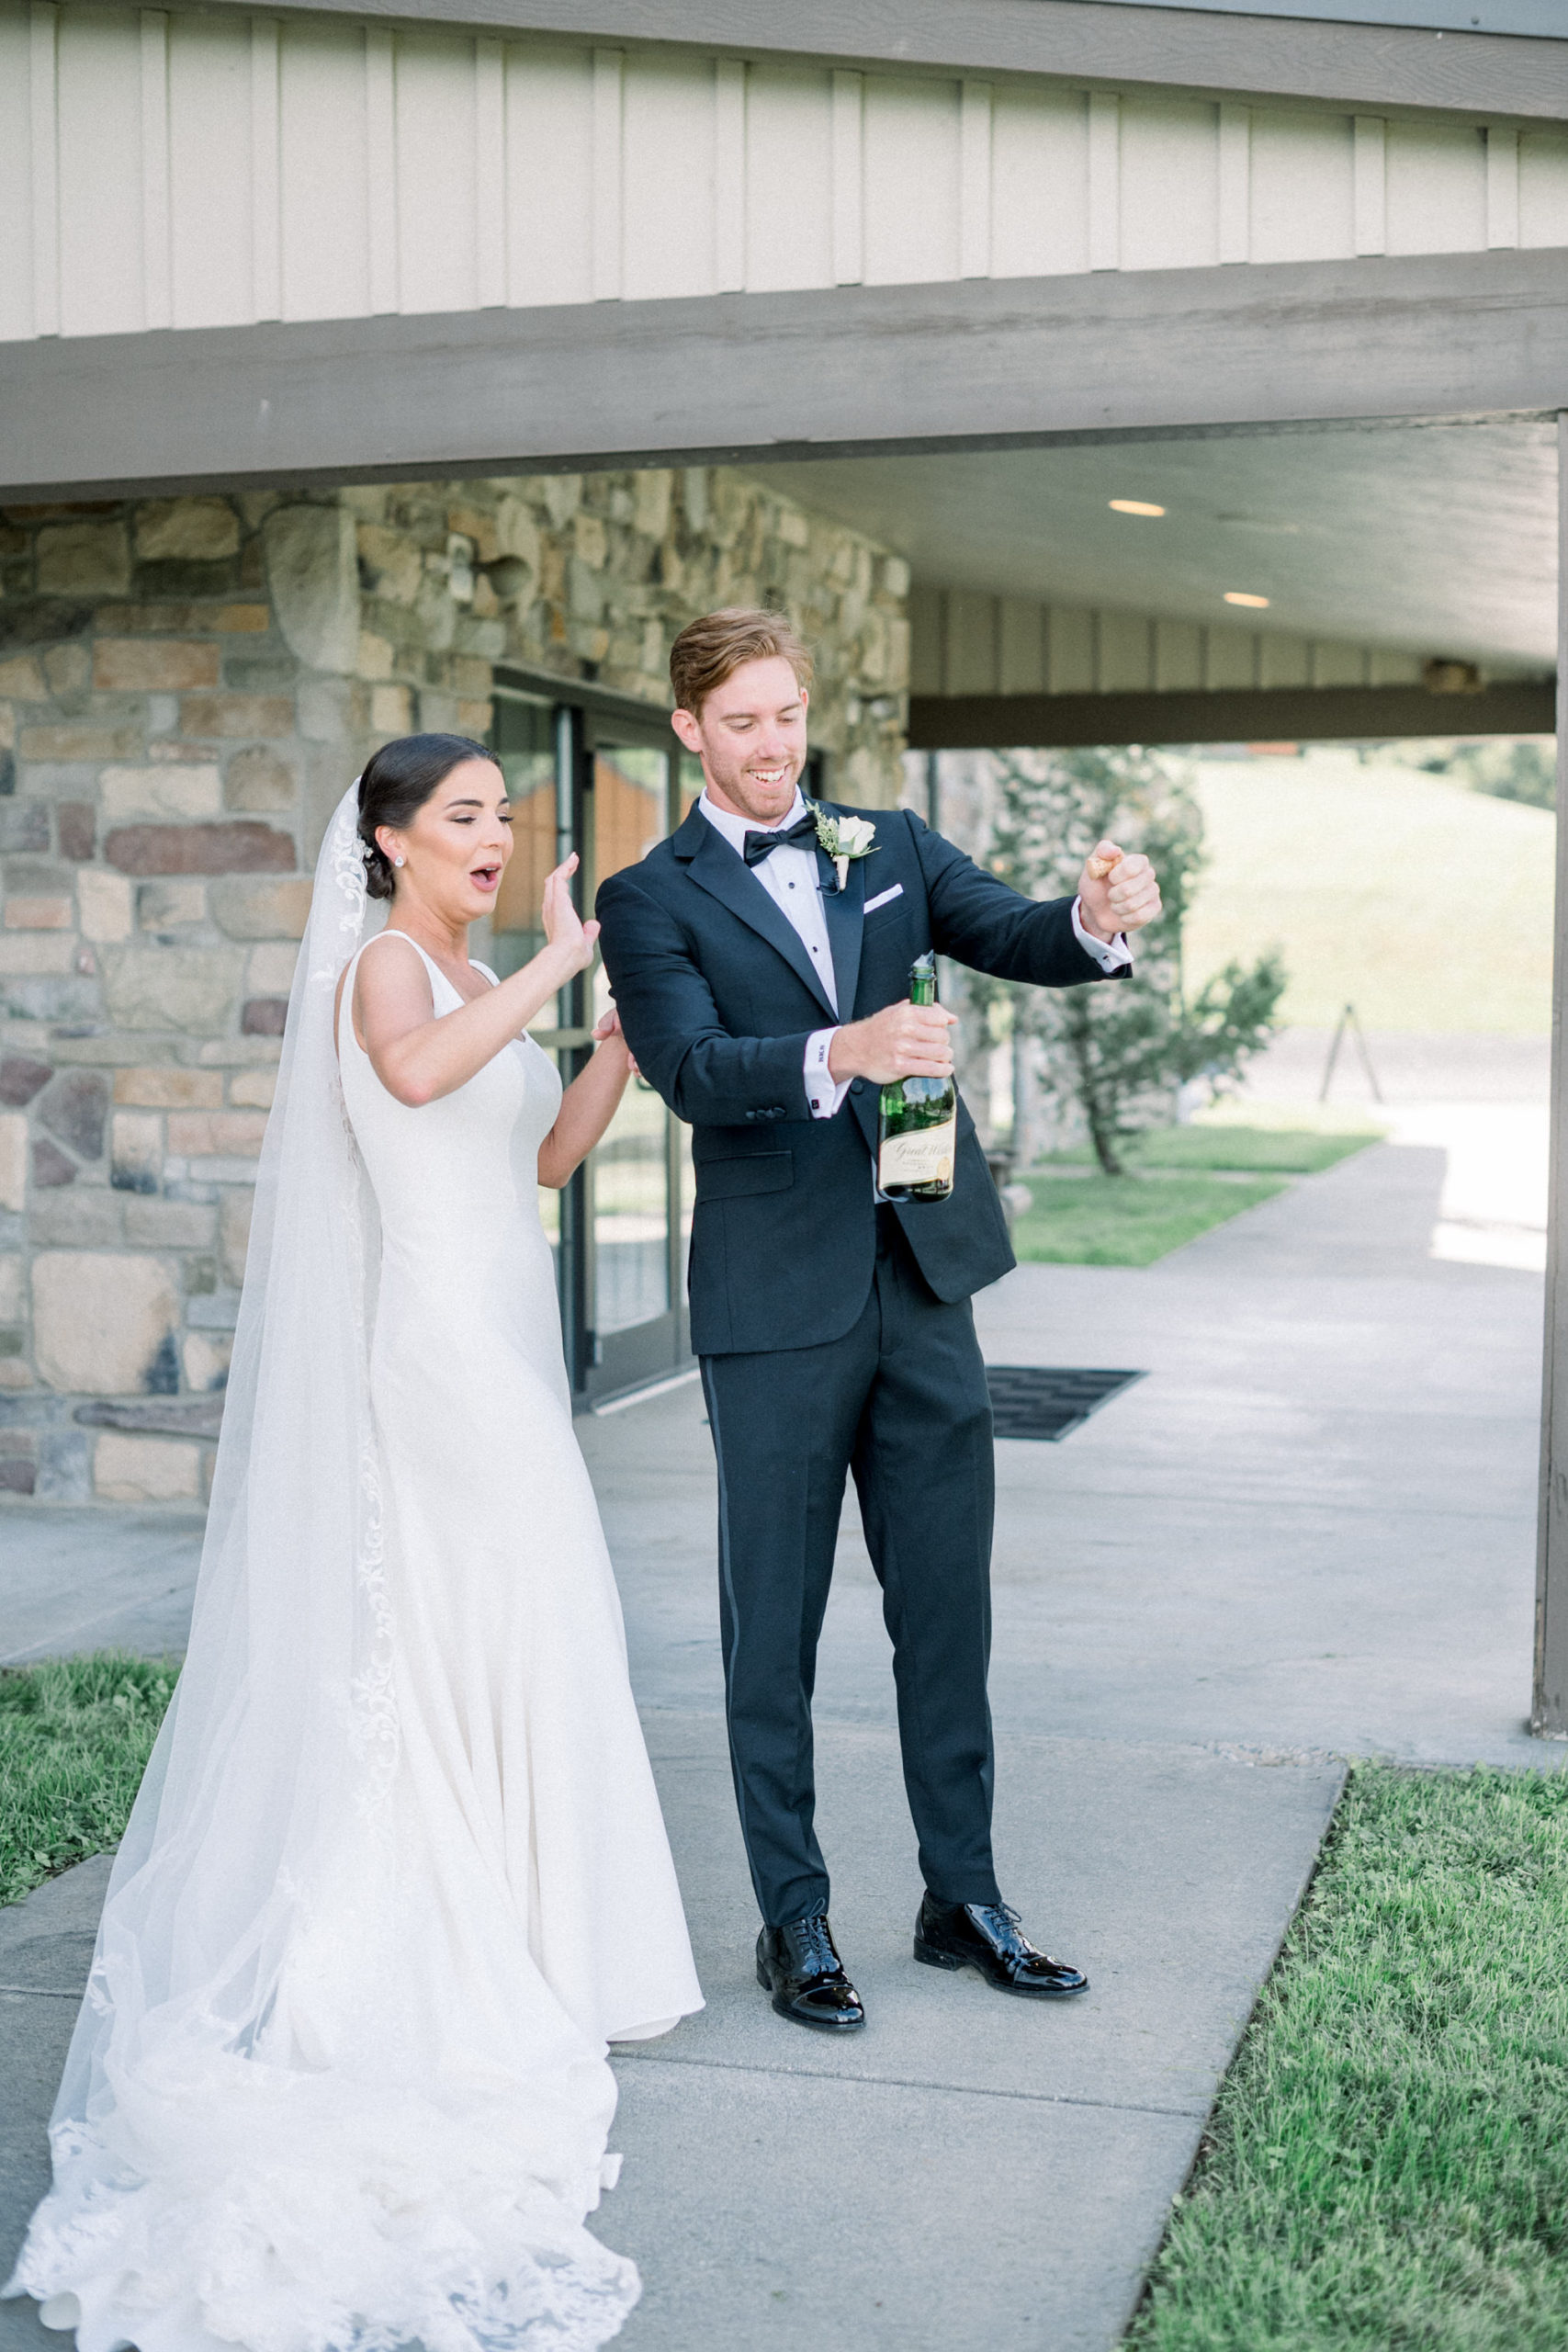 groom pops a bottle of champagne outside of their wedding venue in celebration